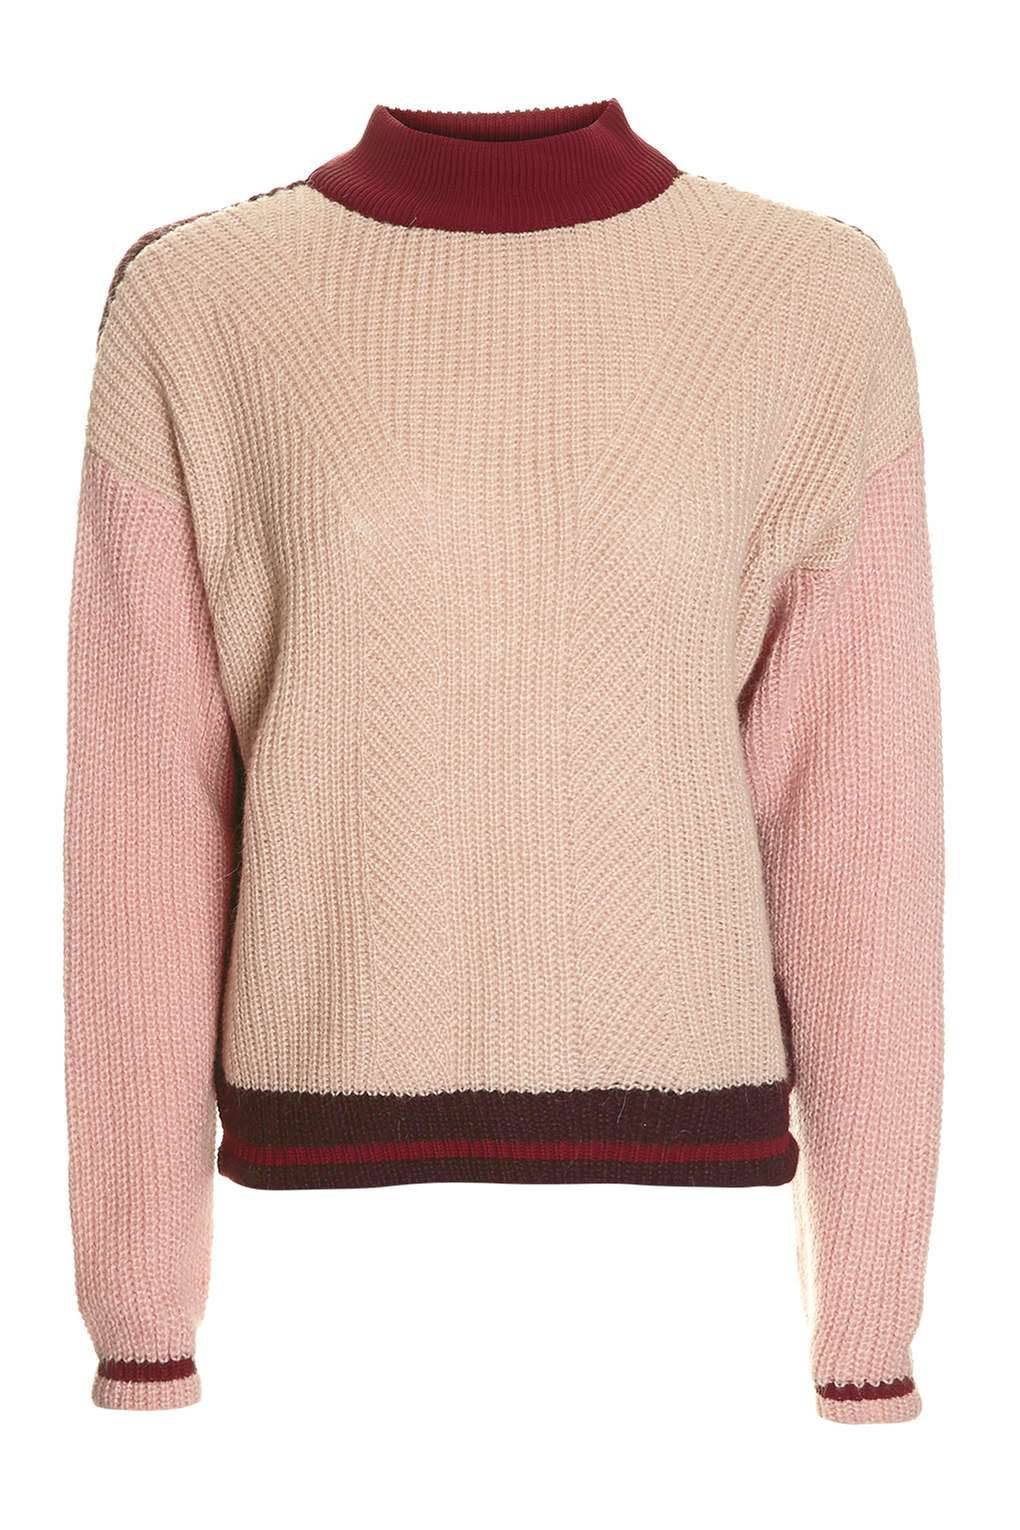 Knitwear that packs a punch: 10 jumpers worth splurging on this weekend